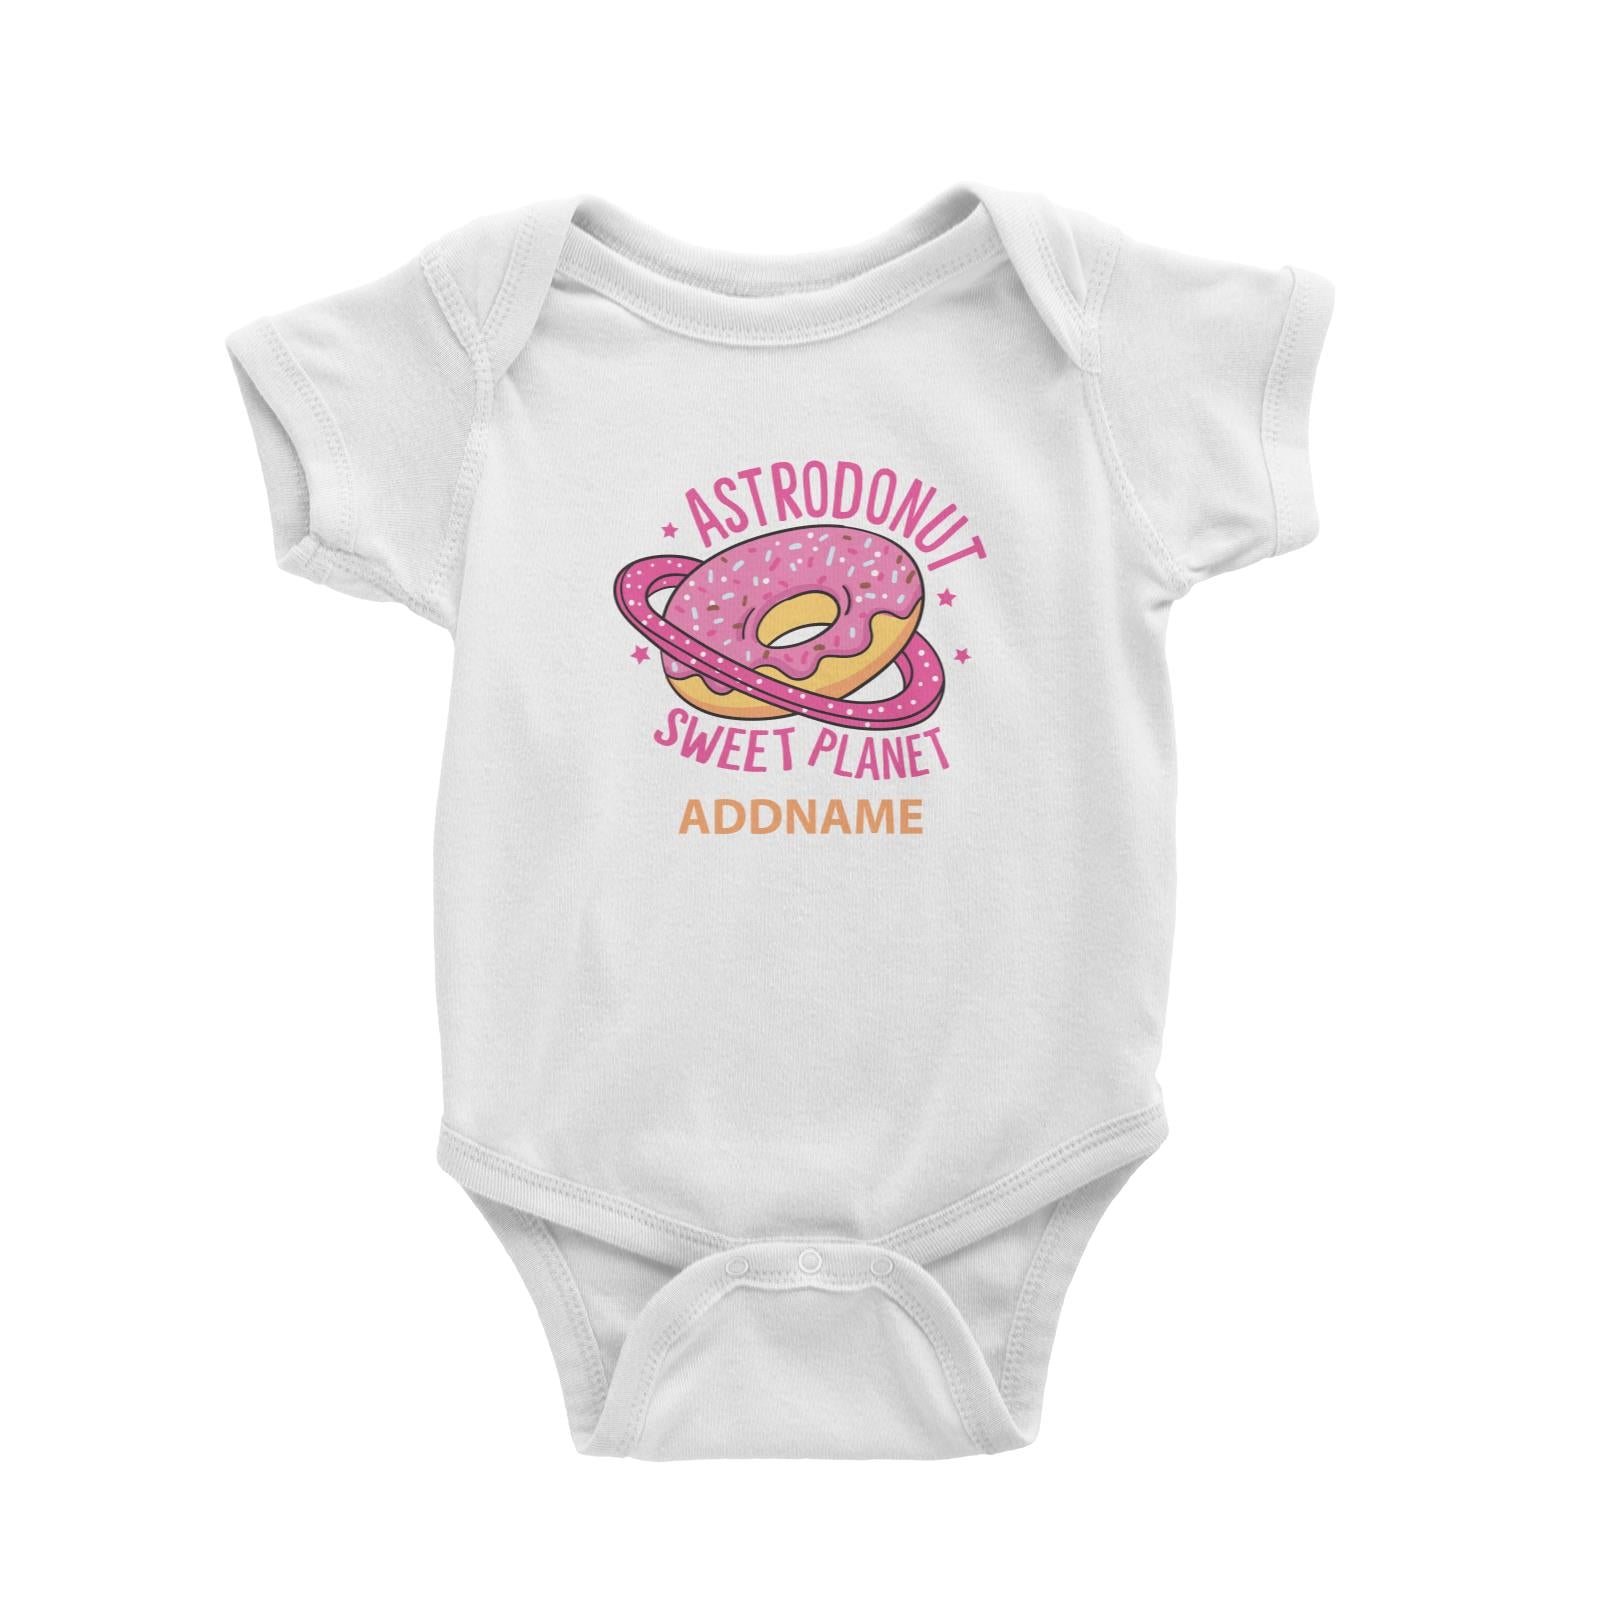 Cool Cute Foods Astrodonut Sweet Planet Addname Baby Romper